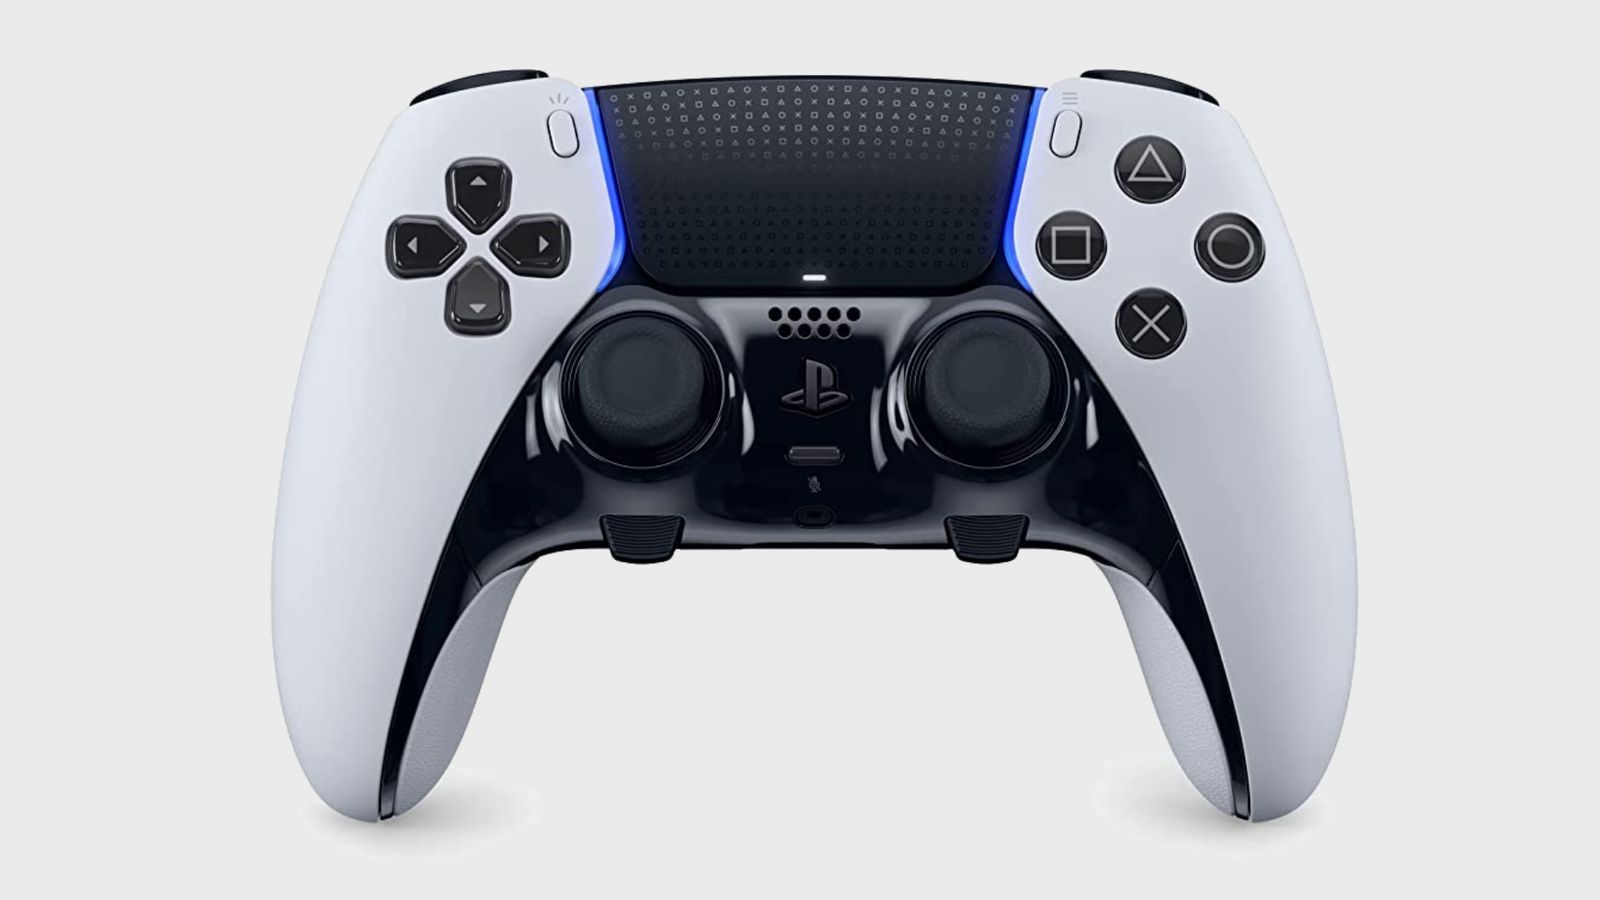 Best controller for F1 22 - Sony DualSense Edge product image of a white and black PS5 gamepad.